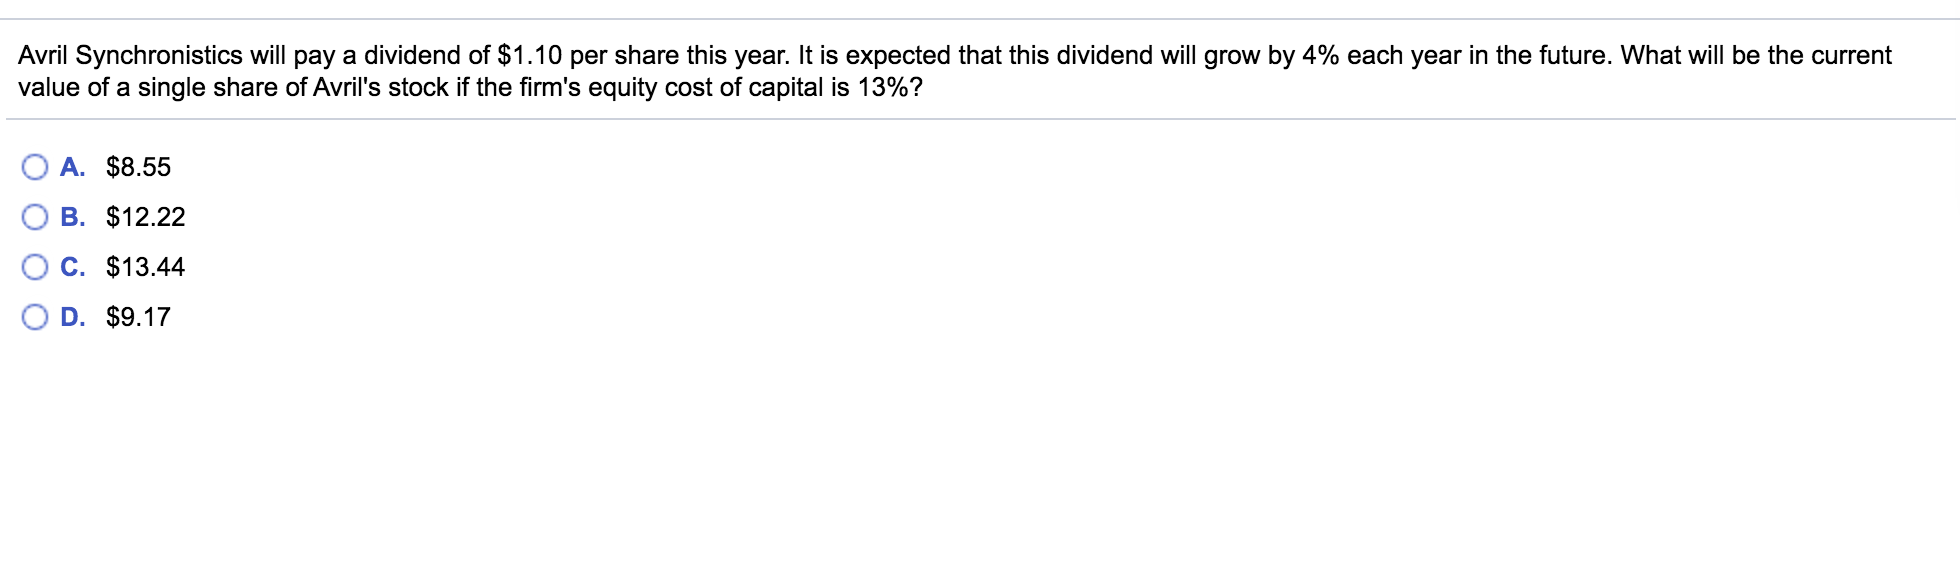 Avril Synchronistics will pay a dividend of $1.10 per share this year. It is expected that this dividend will grow by 4% each year in the future. What will be the current
value of a single share of Avril's stock if the firm's equity cost of capital is 13%?
A. $8.55
B. $12.22
C. $13.44
D. $9.17
